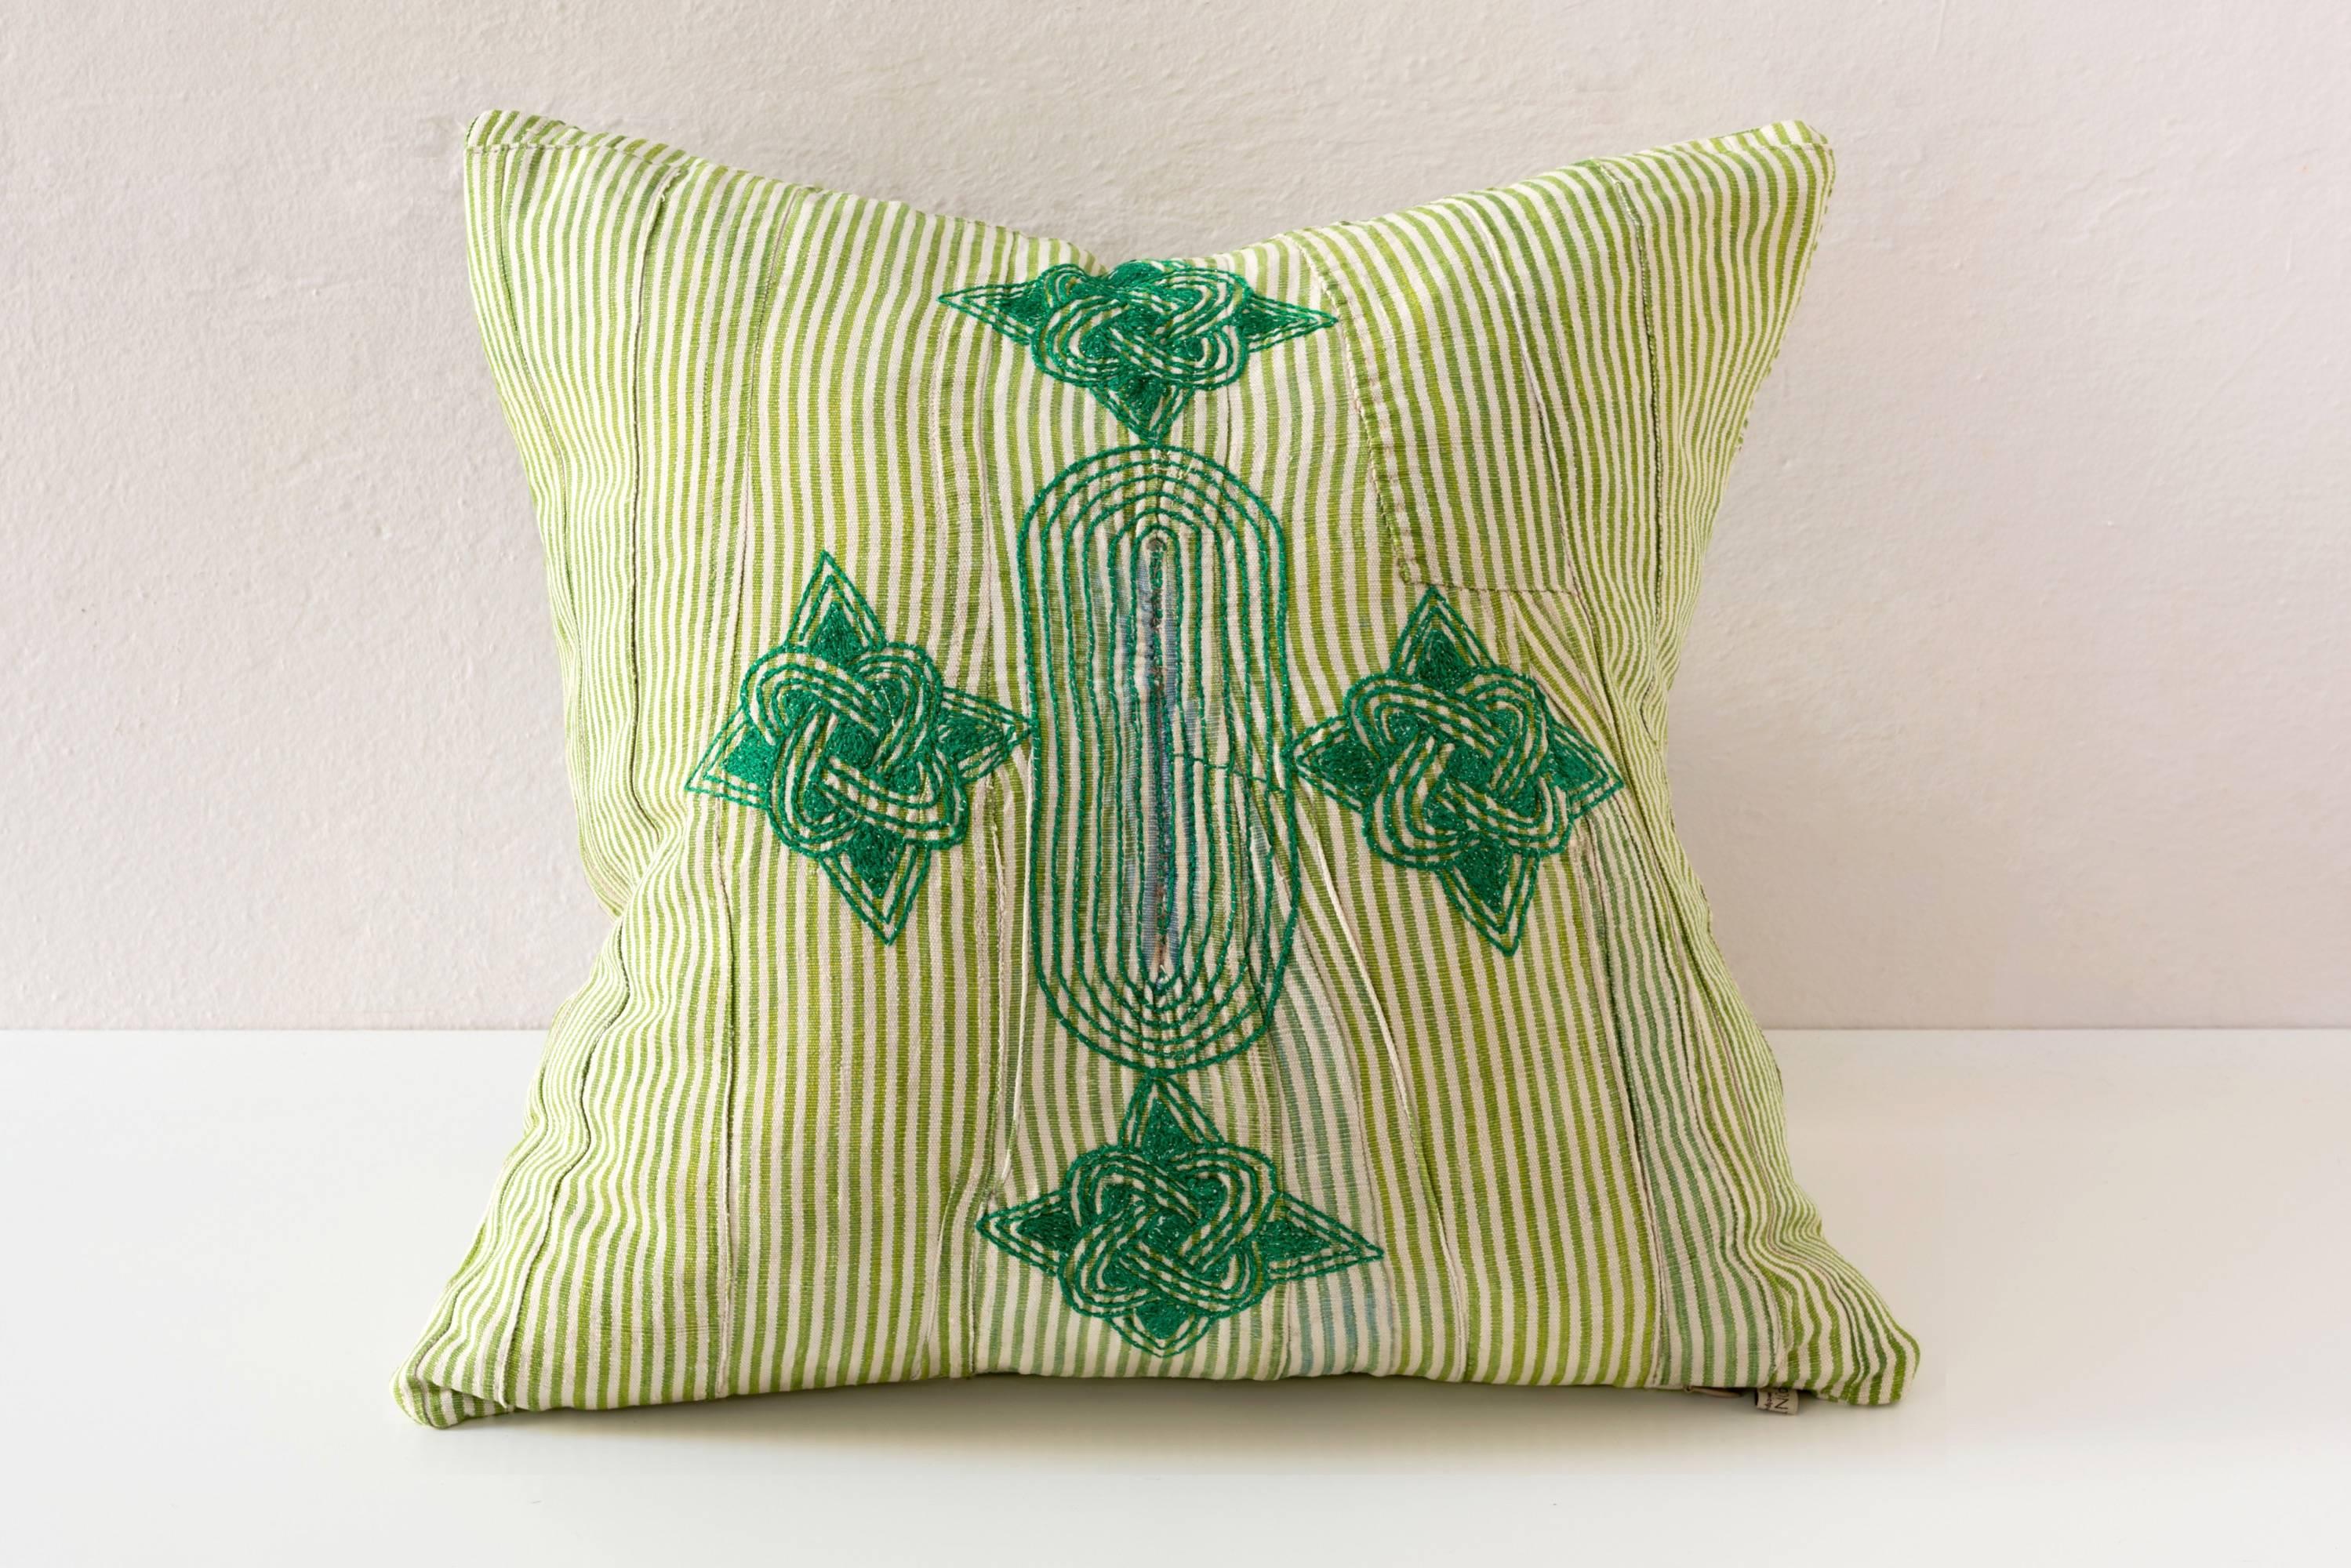 Nigerian Vintage Grand Boubou Textile Pillow in Greens For Sale